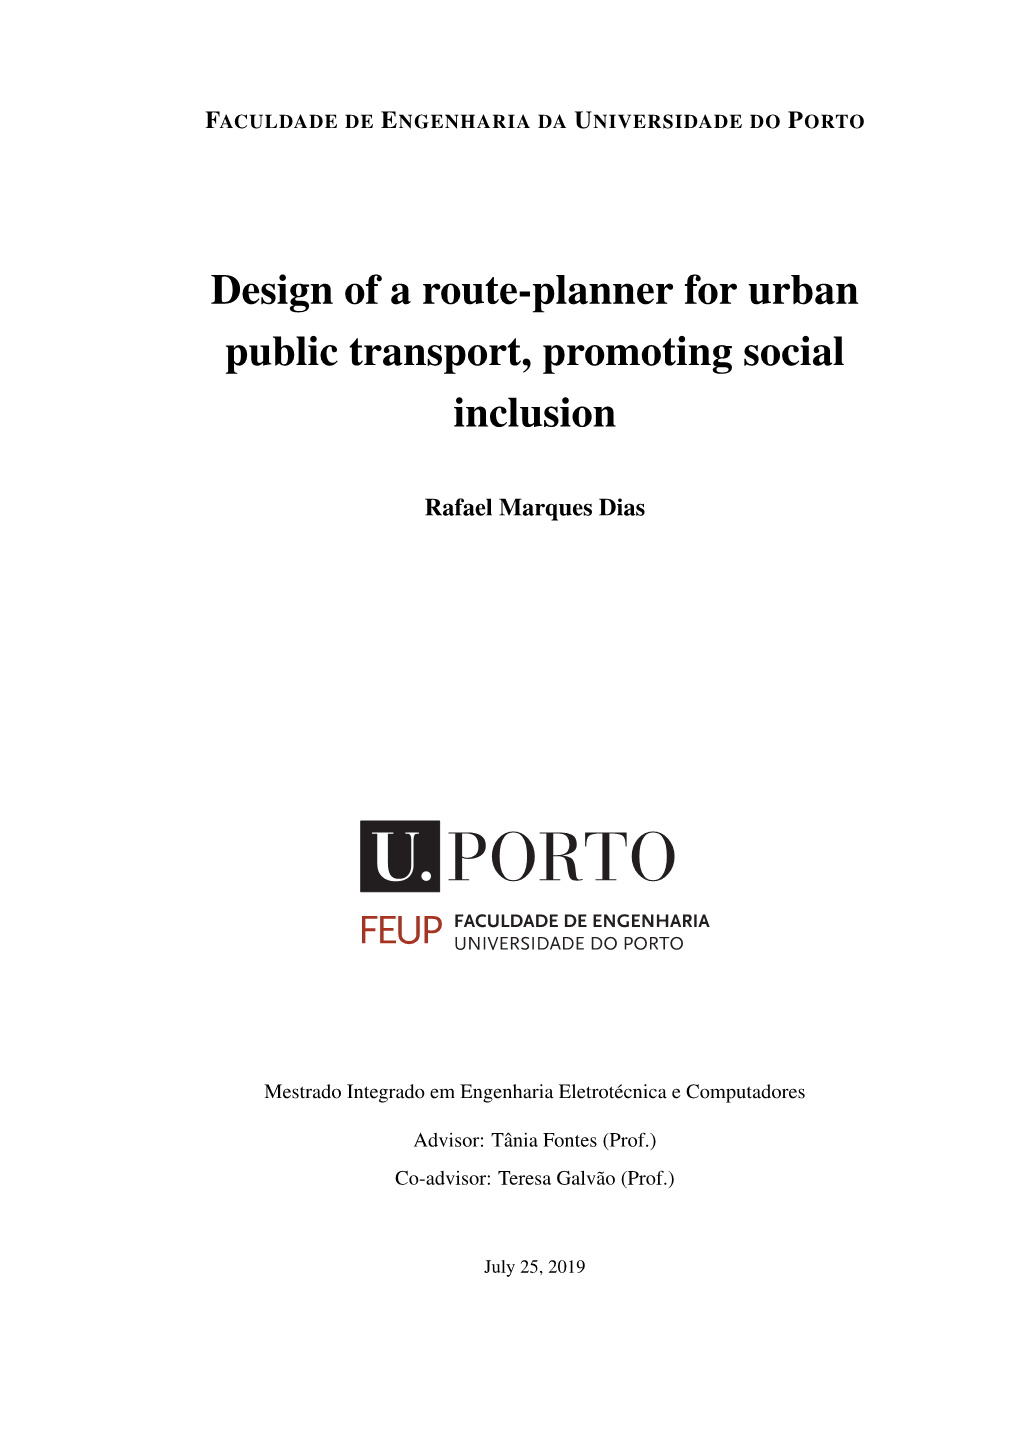 Design of a Route-Planner for Urban Public Transport, Promoting Social Inclusion